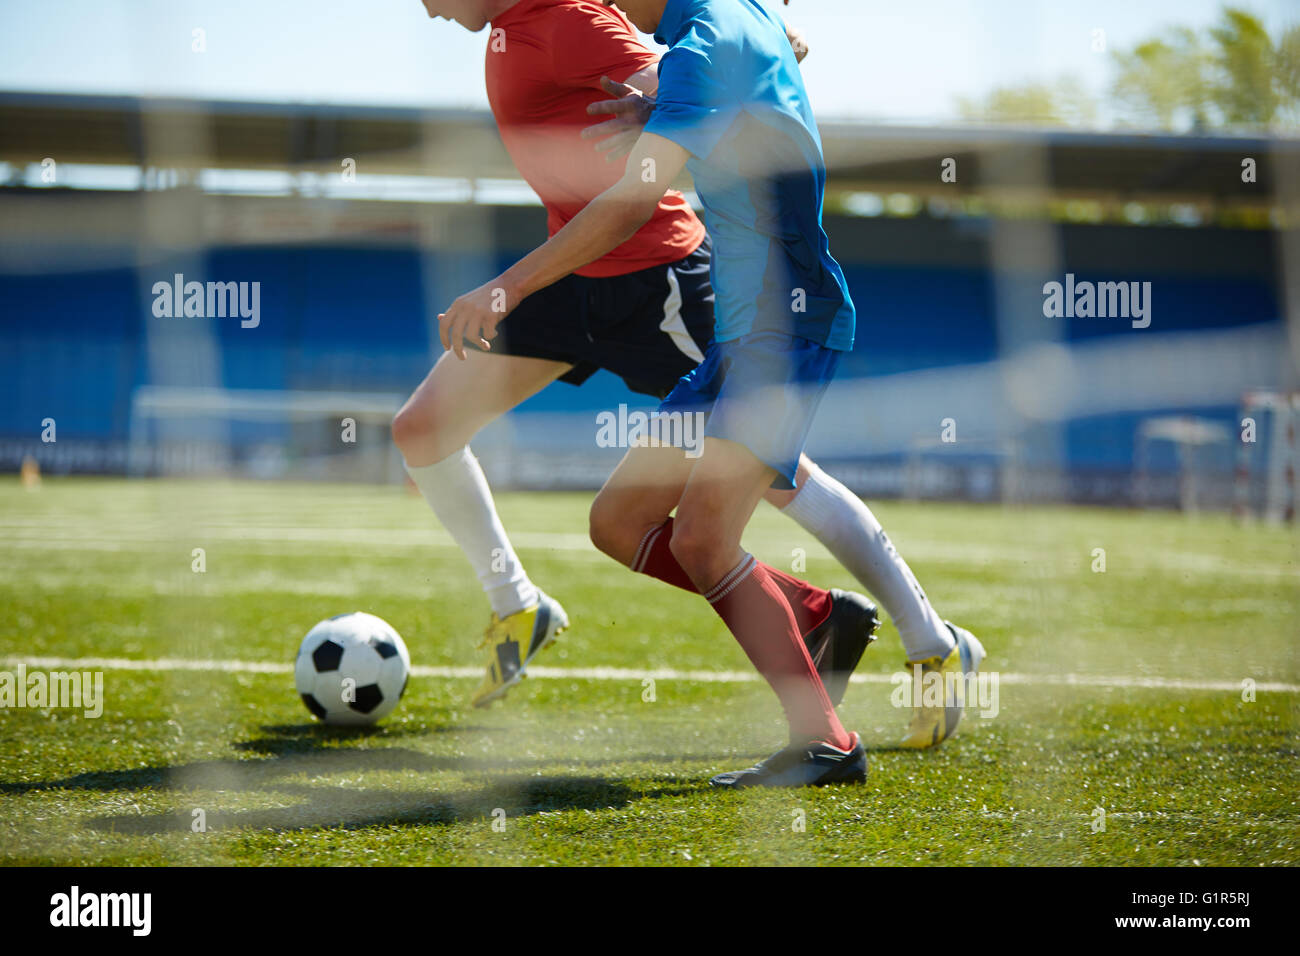 Trying to tackle the ball Stock Photo